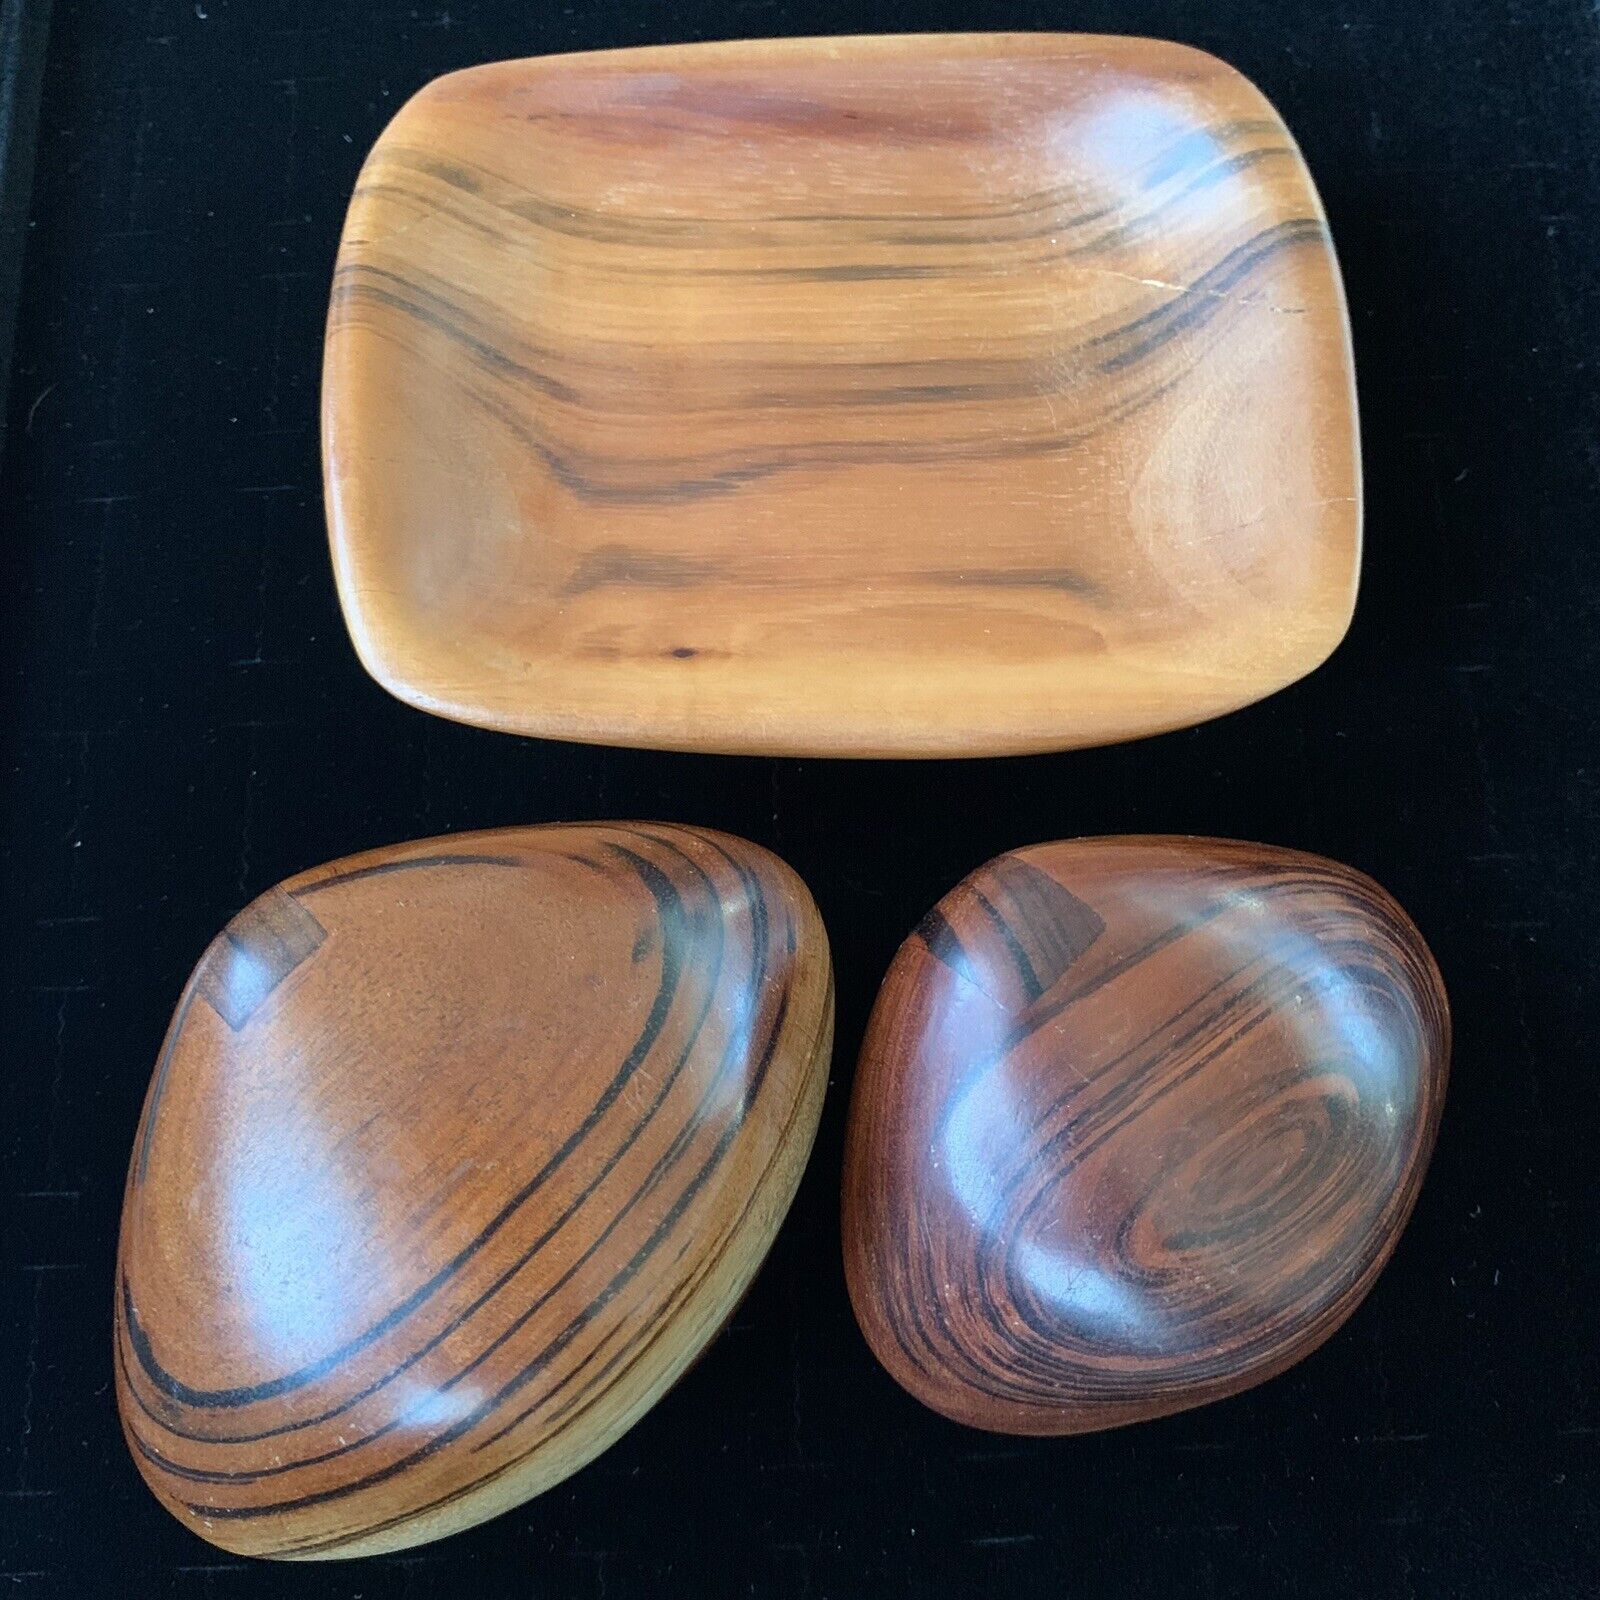 3 Pc Lot-2 Handcrafted Wood Clamshell Trinket Boxes And Small Wood Trinket Tray